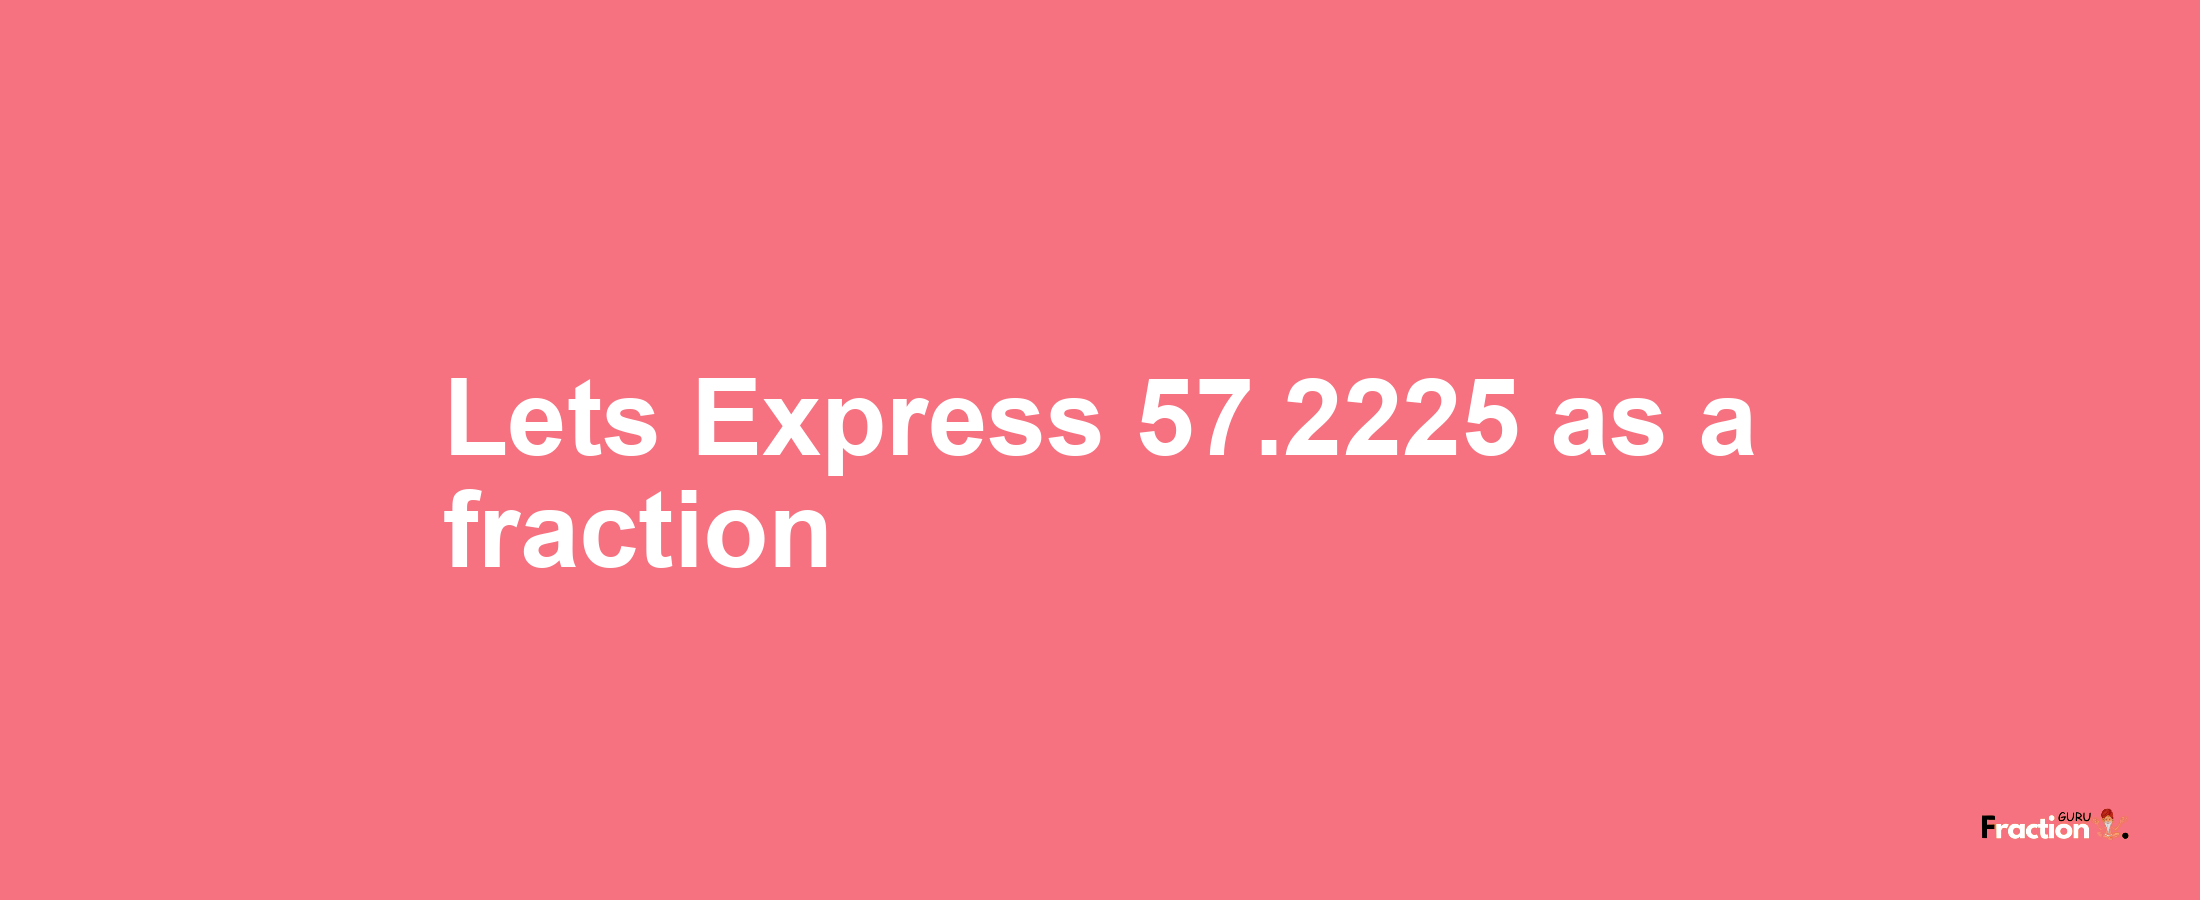 Lets Express 57.2225 as afraction